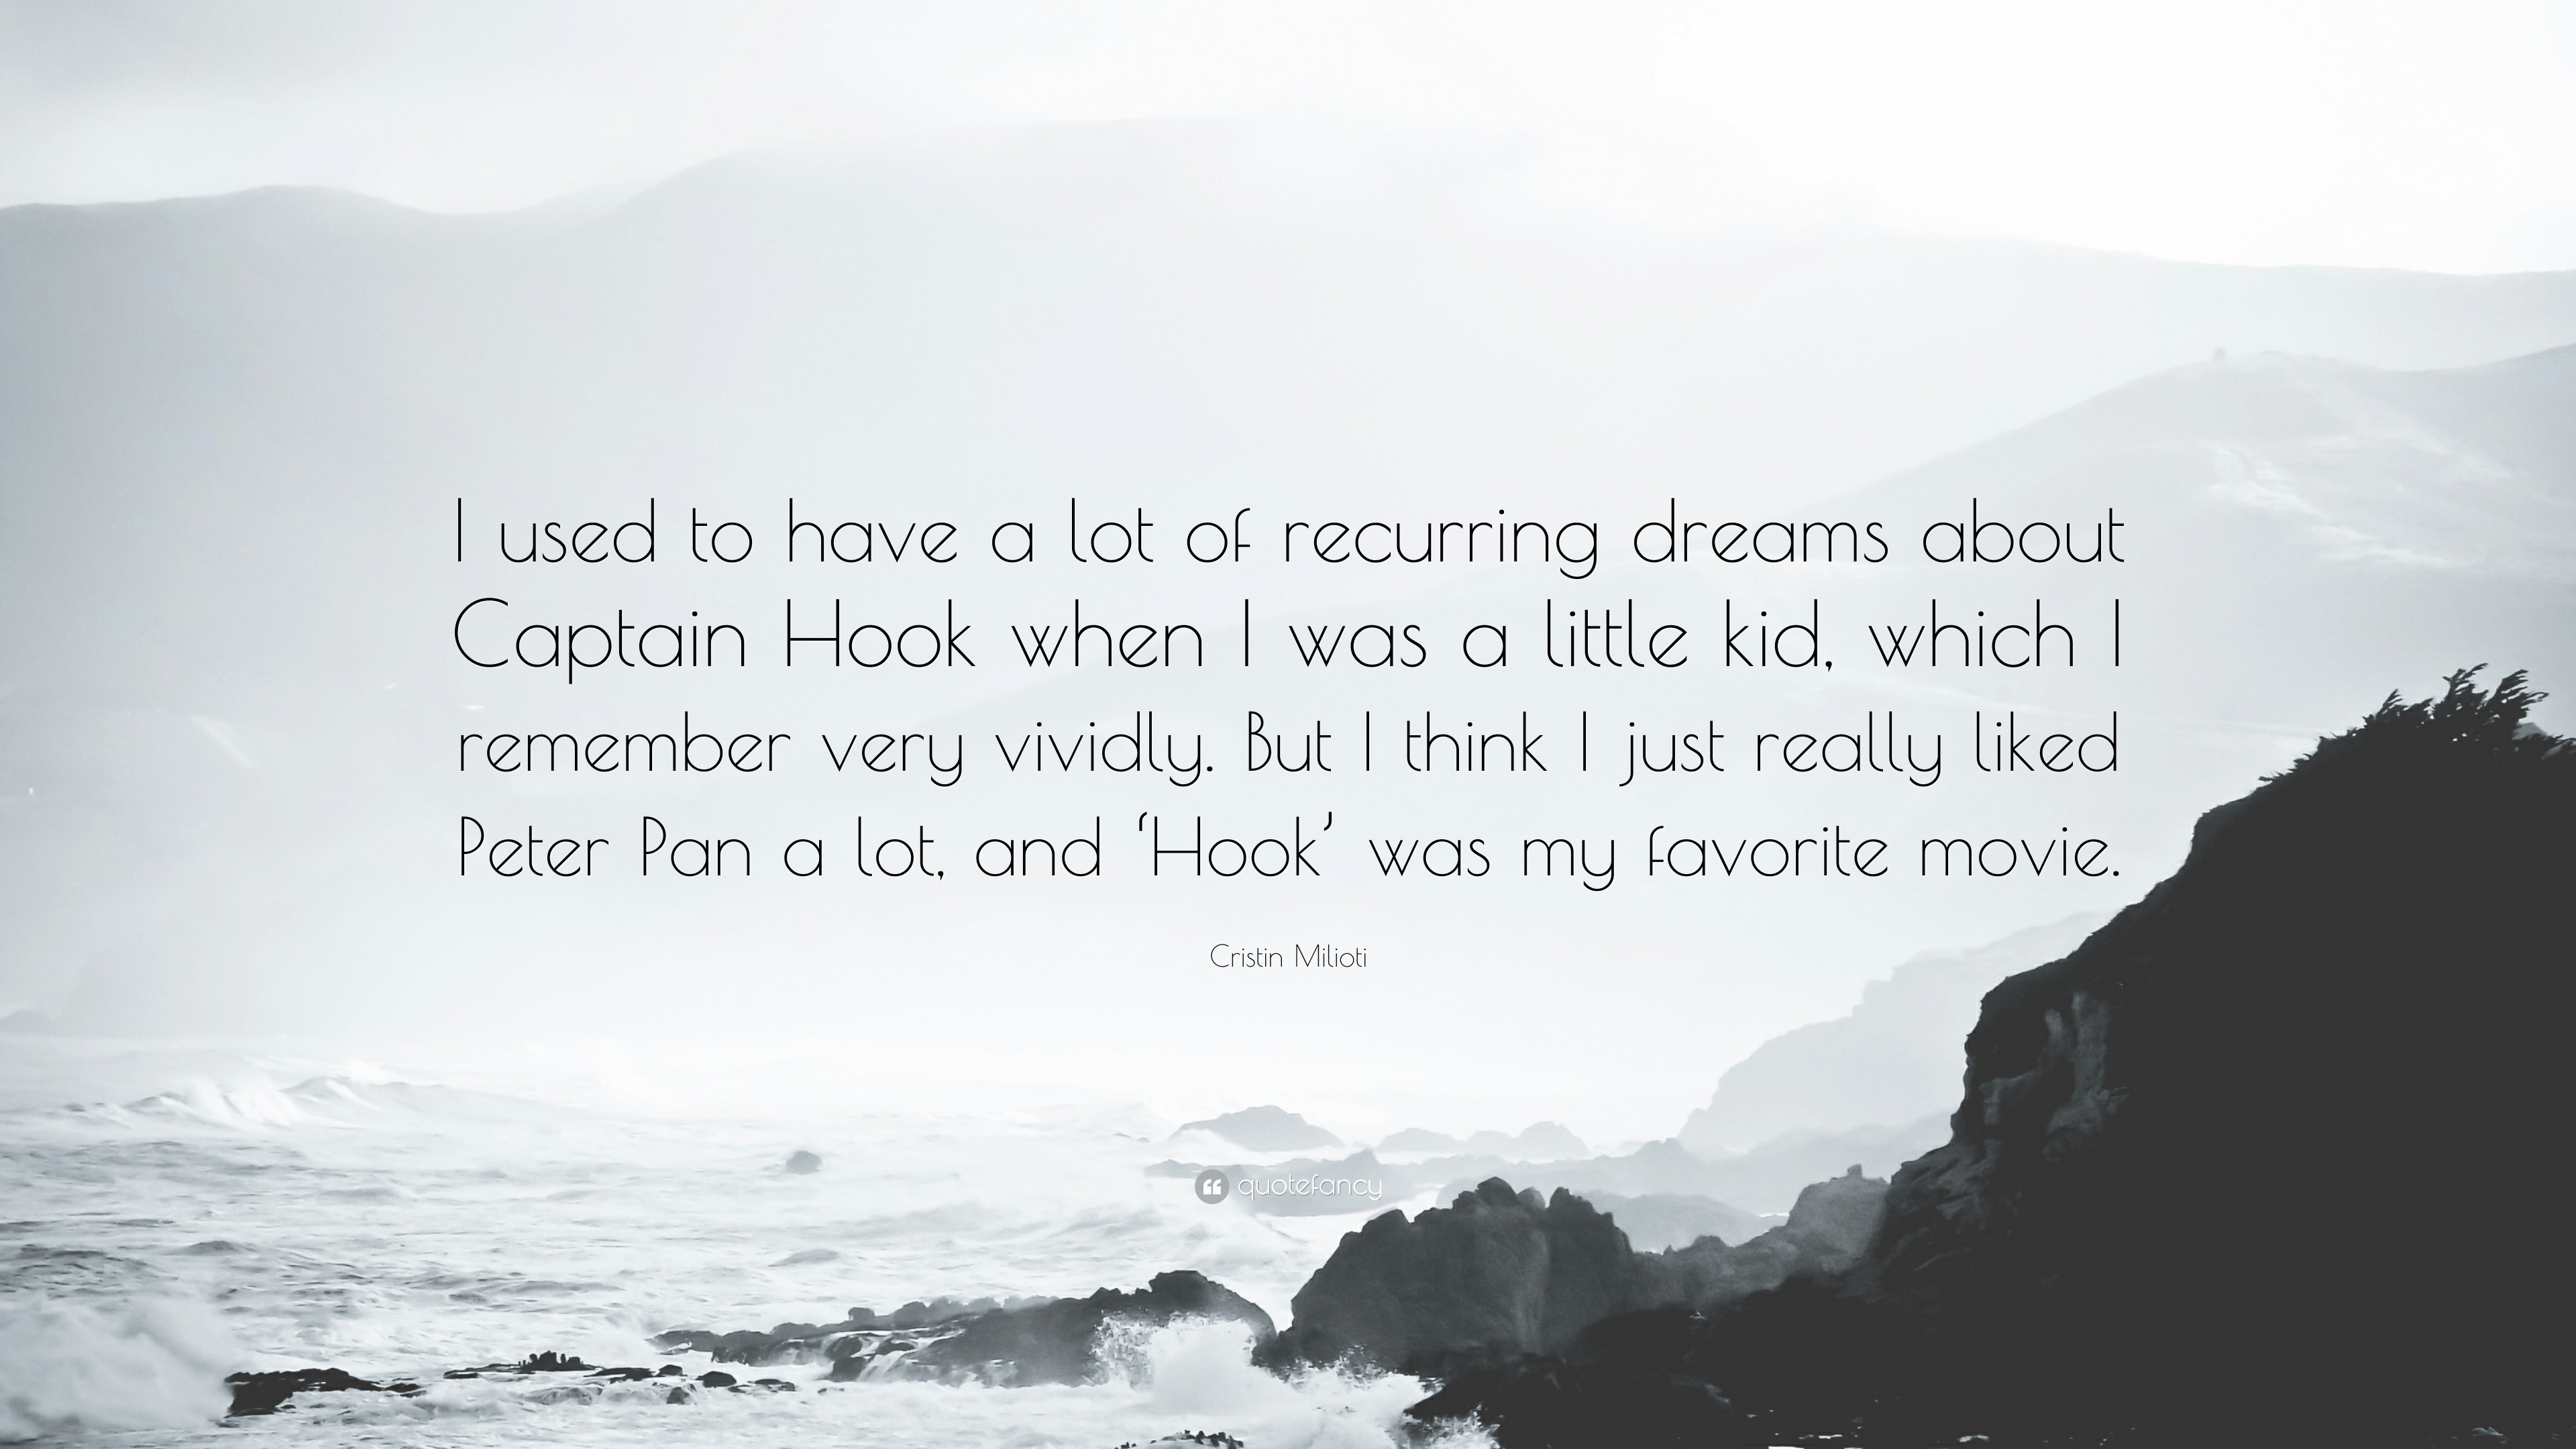 3840x2160 7 wallpapers. Cristin Milioti Quote: “I used to have a lot of recurring  dreams about Captain